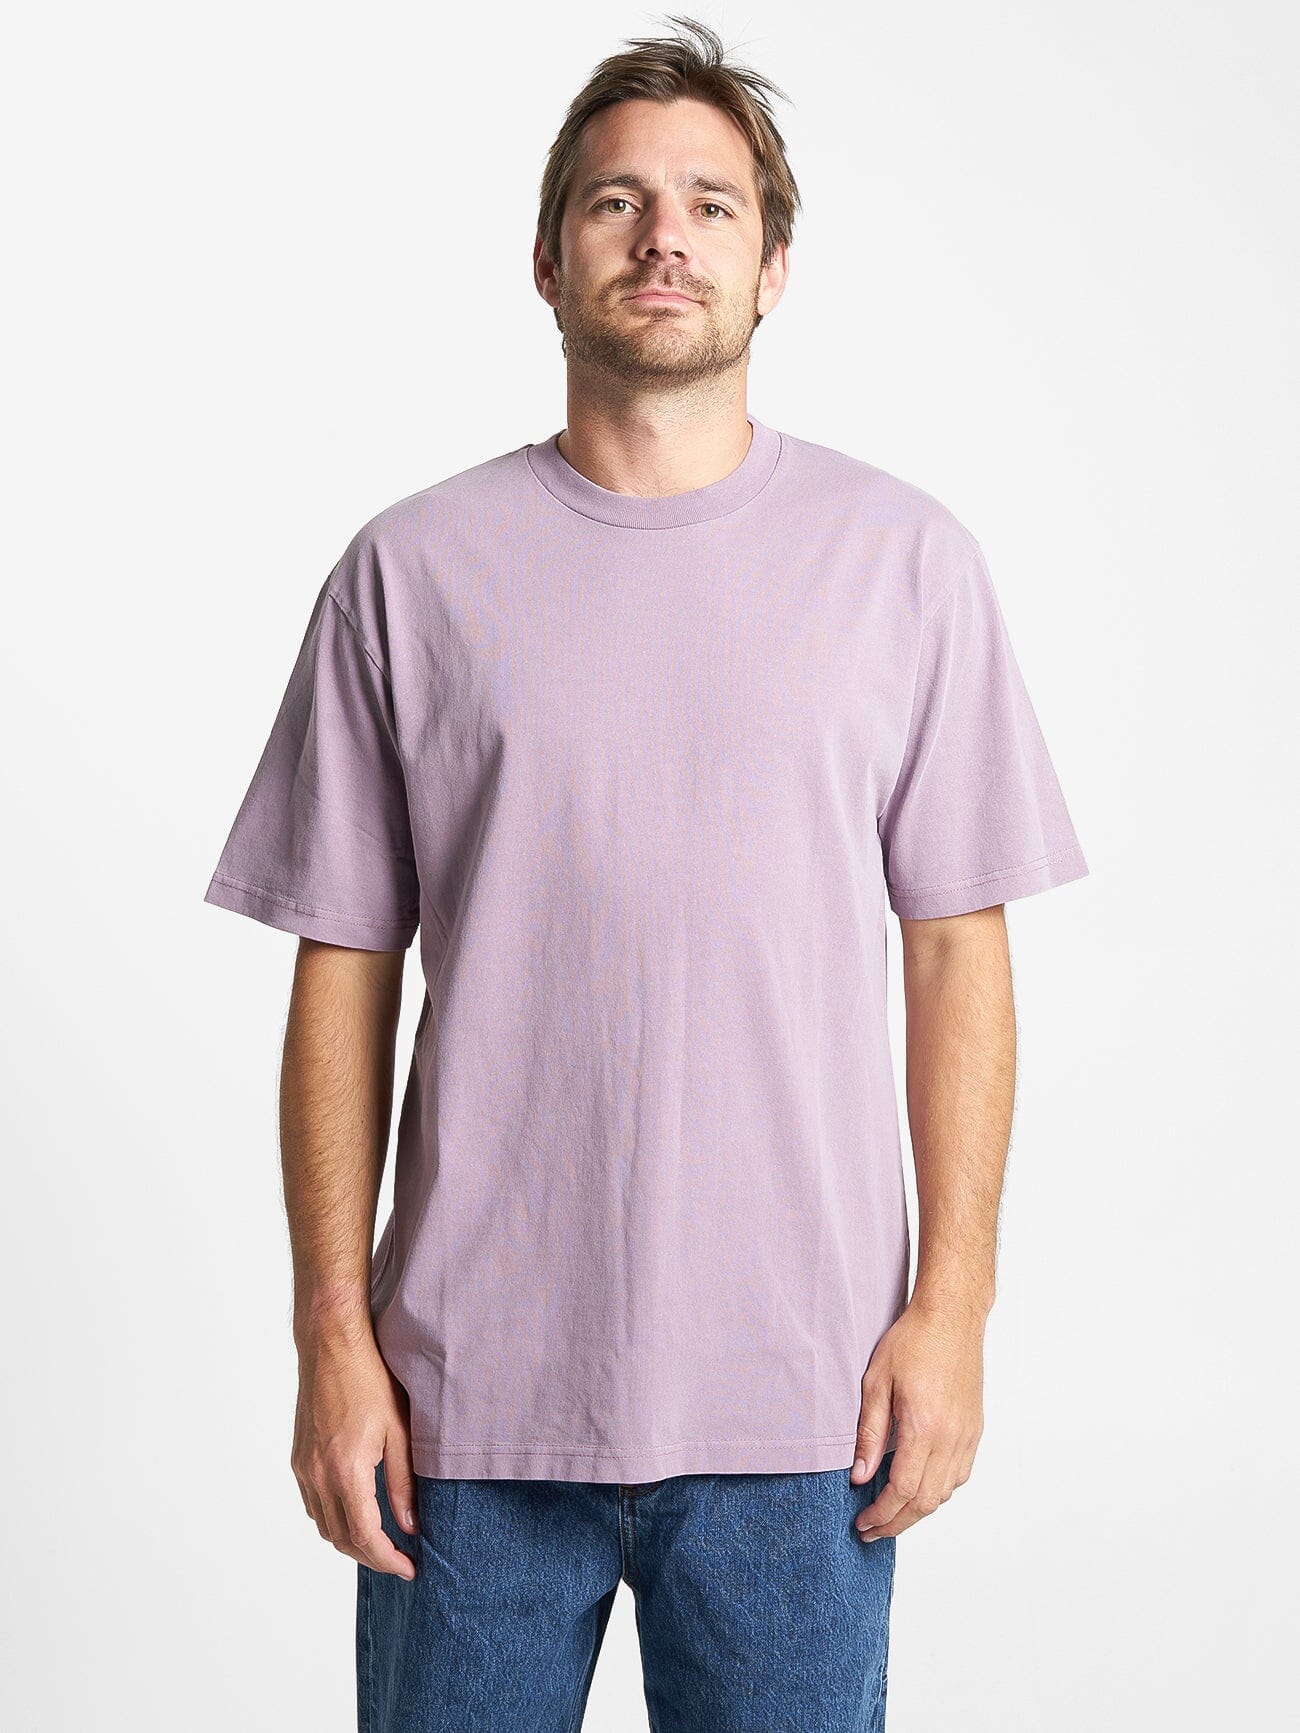 Purple Brand P101 Relaxed Fit Tee - Graphic Tire White Tee